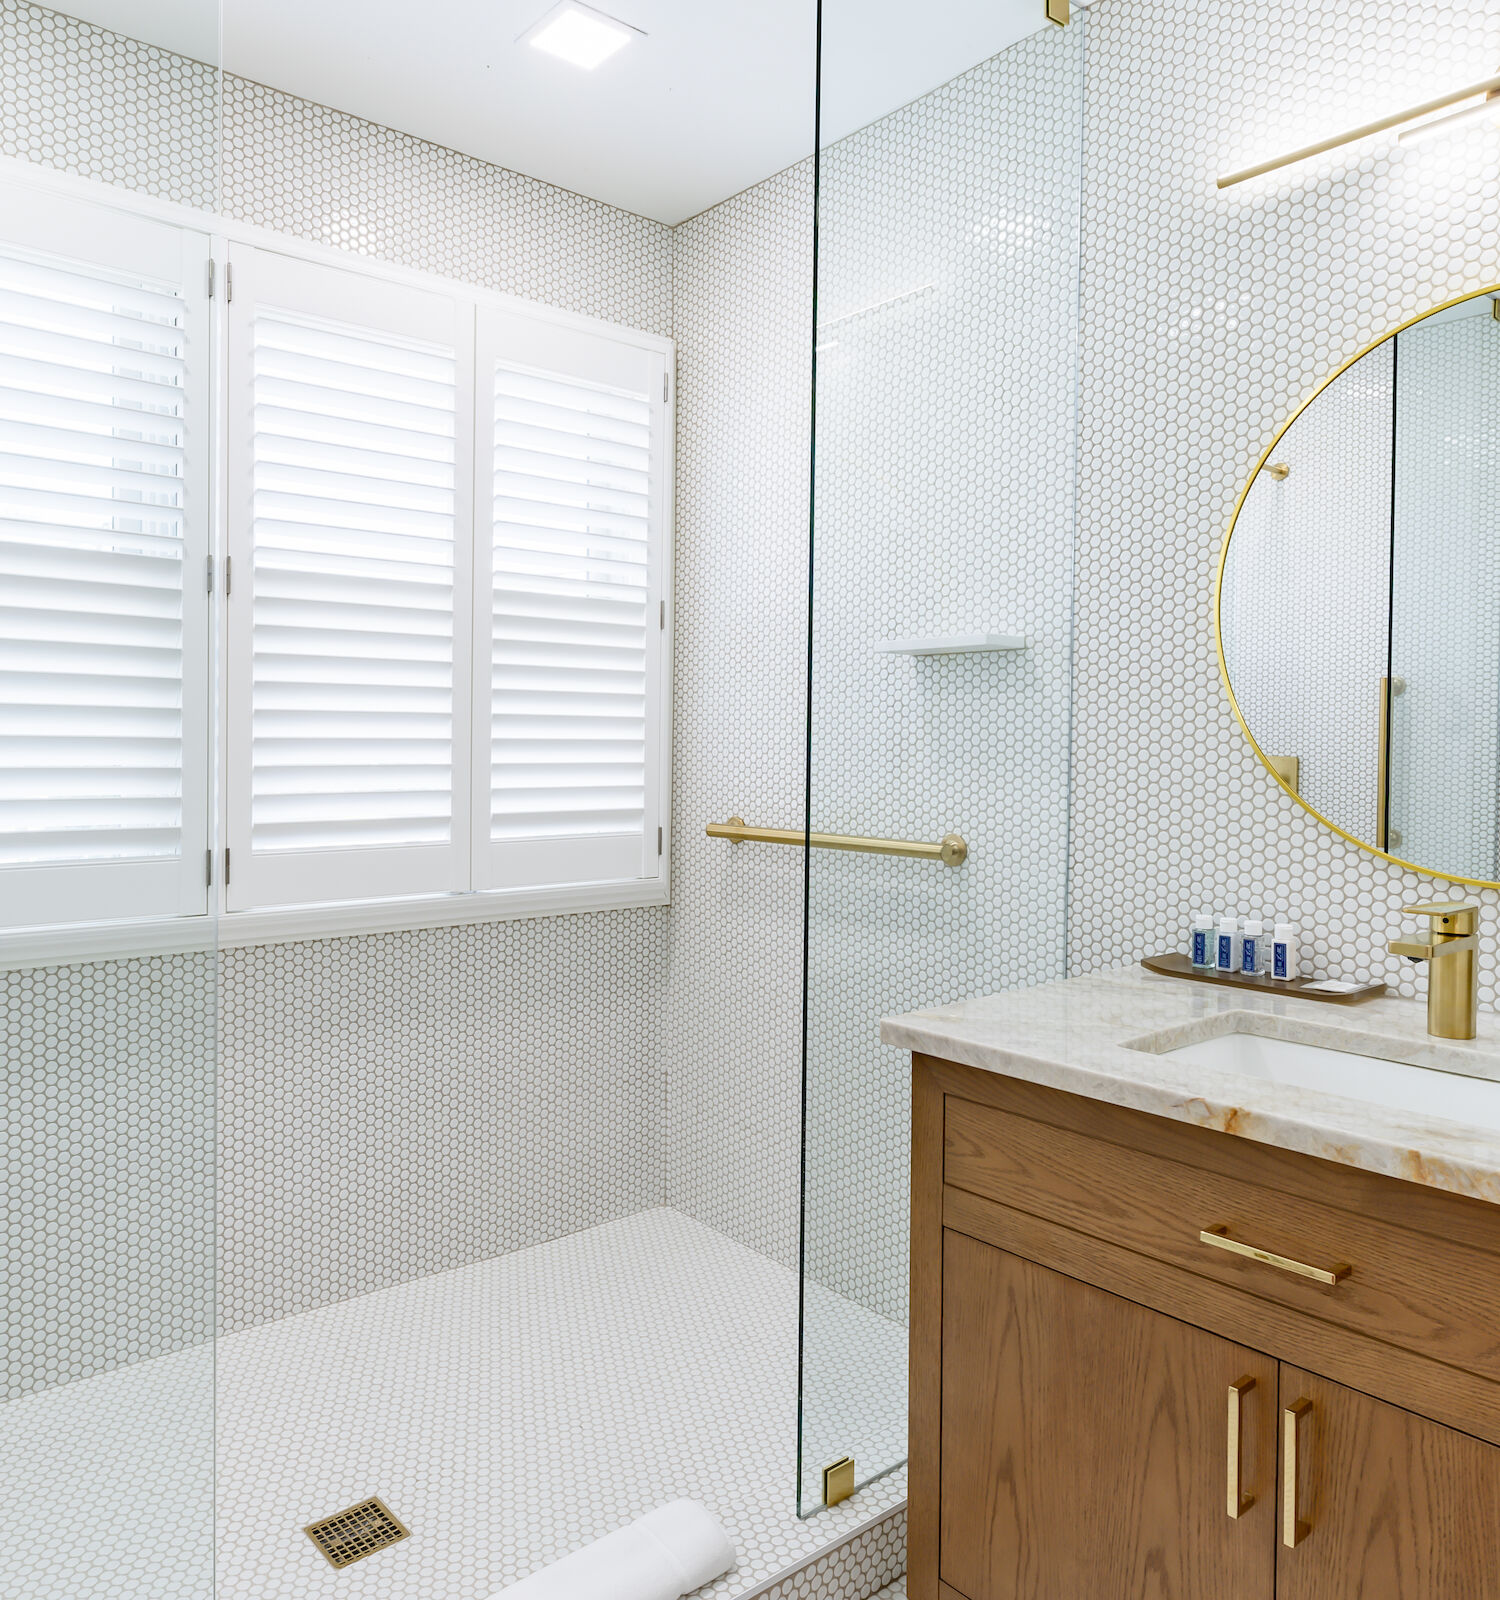 This image shows a modern bathroom with a glass shower, wood vanity, round mirror, gold fixtures, and white walls with a small tile pattern.